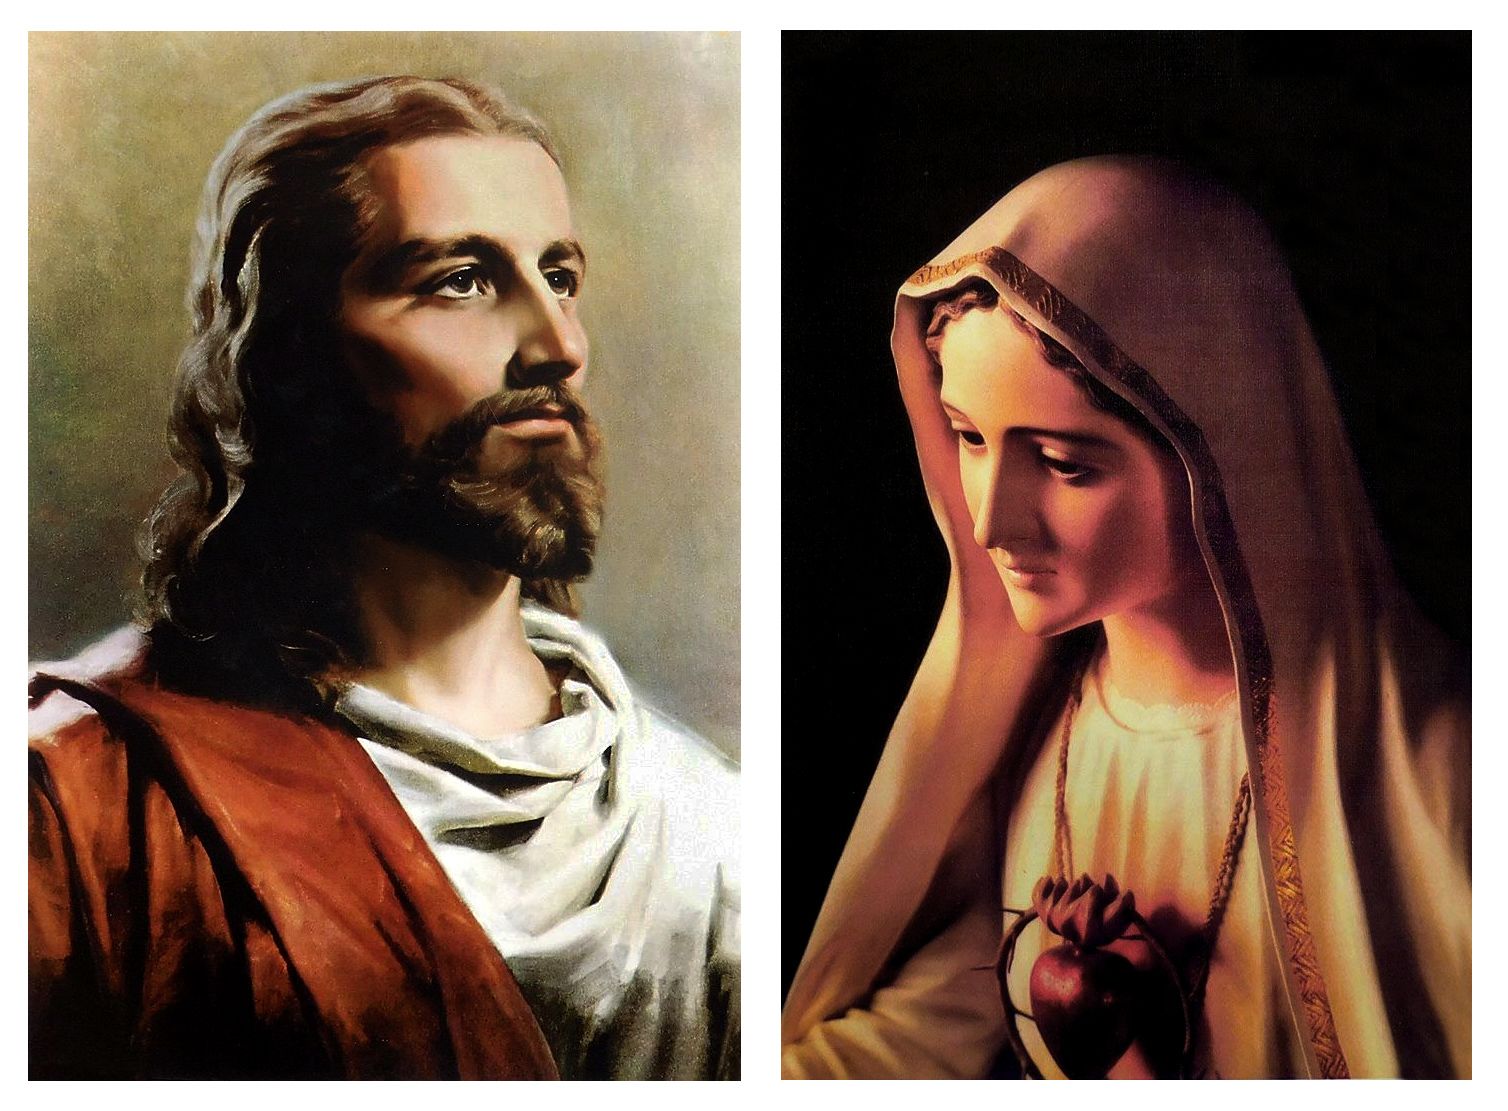 Mother Mary and Jesus Christ - Set of 2 Posters